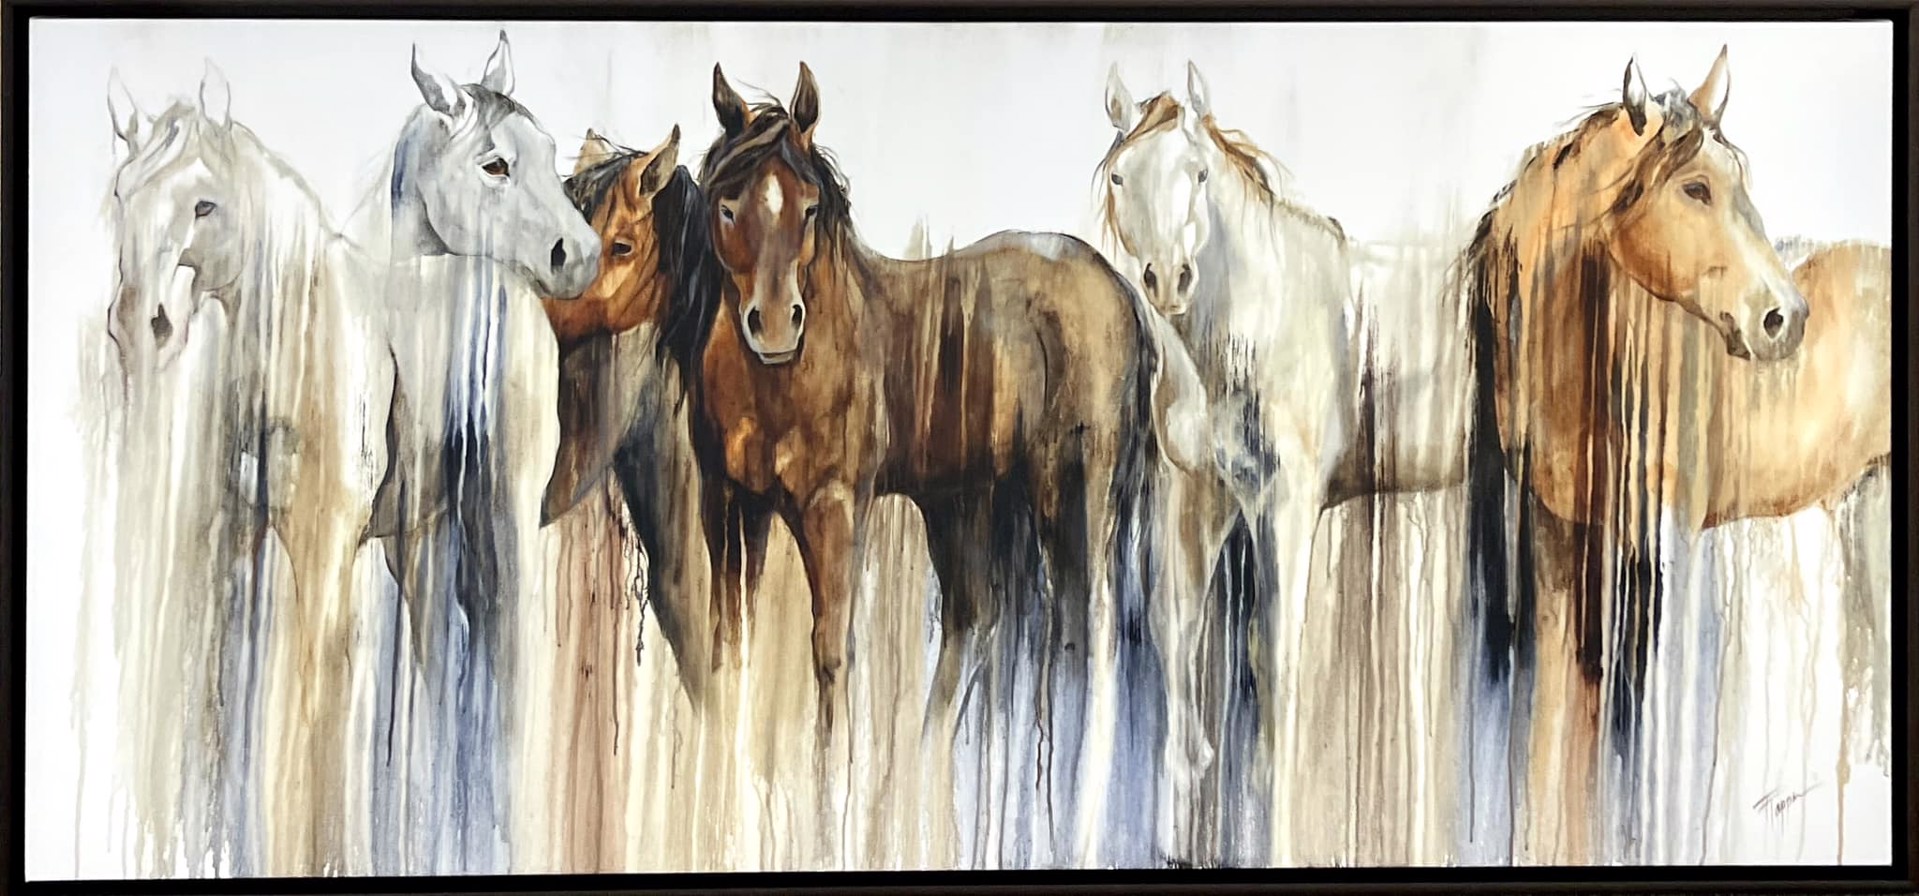 The Herd by Tammy Tappan